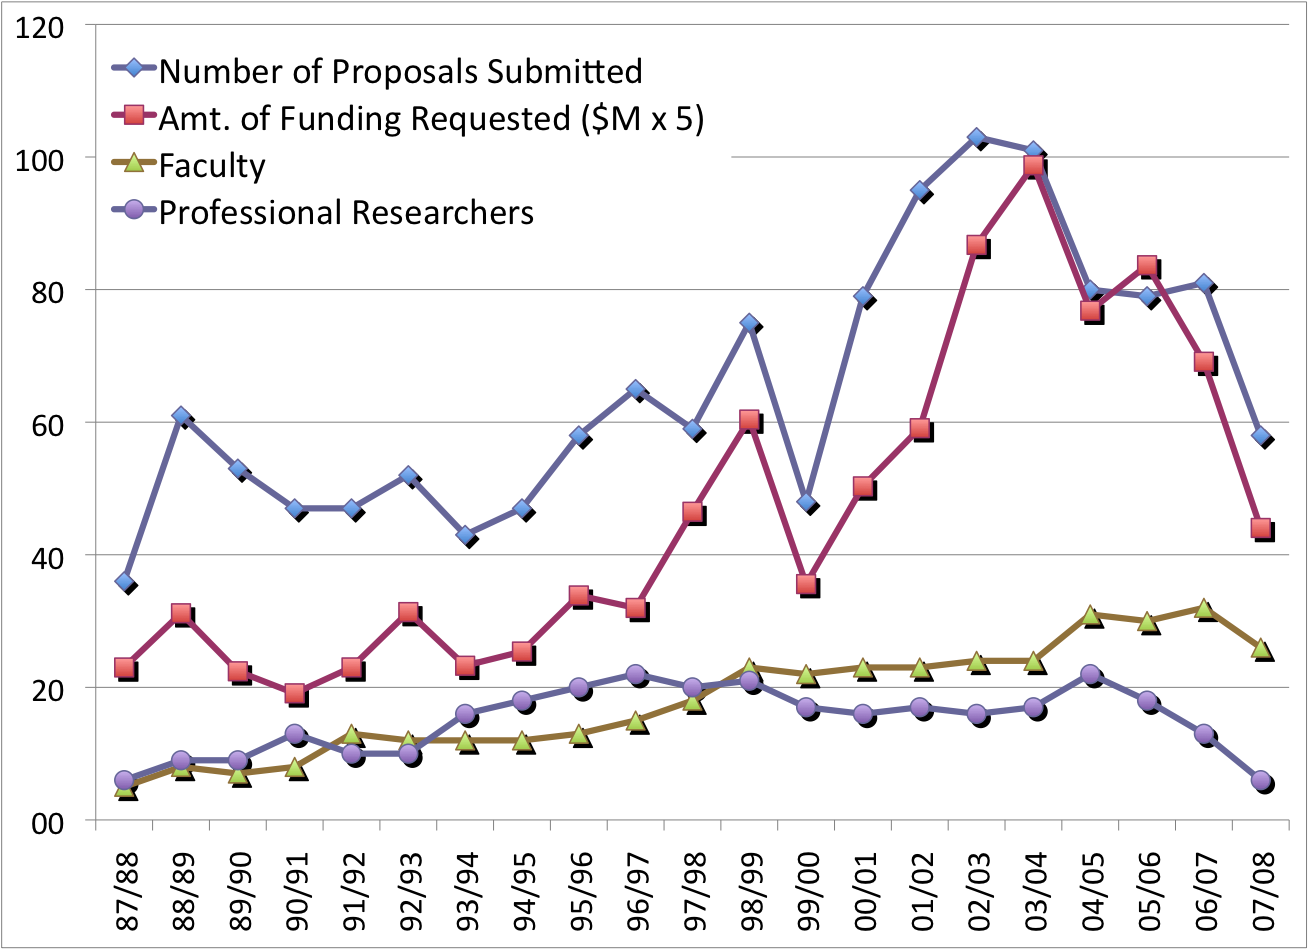 Number of Proposals Submitted